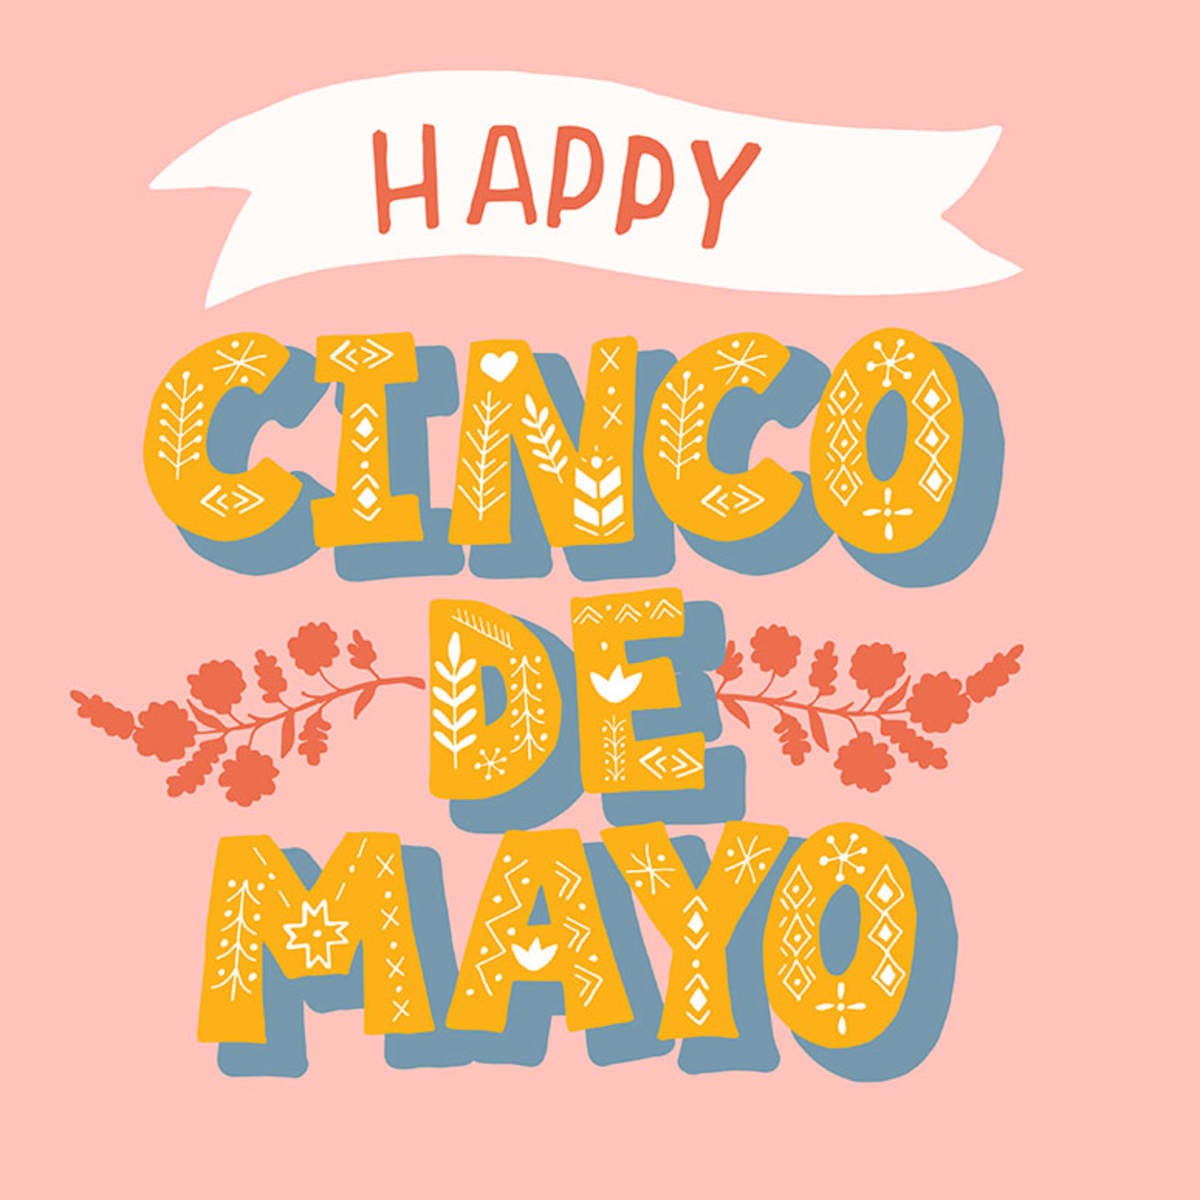 Happy Cinco de Mayo, amigos! Today we celebrate the rich culture and heritage of Mexico. From mariachi music to delicious tacos and margaritas, let's honor this special day with love, joy, and festive spirits. ¡Viva México! #CincodeMayo #FiestaTime 🎉🌮🍹